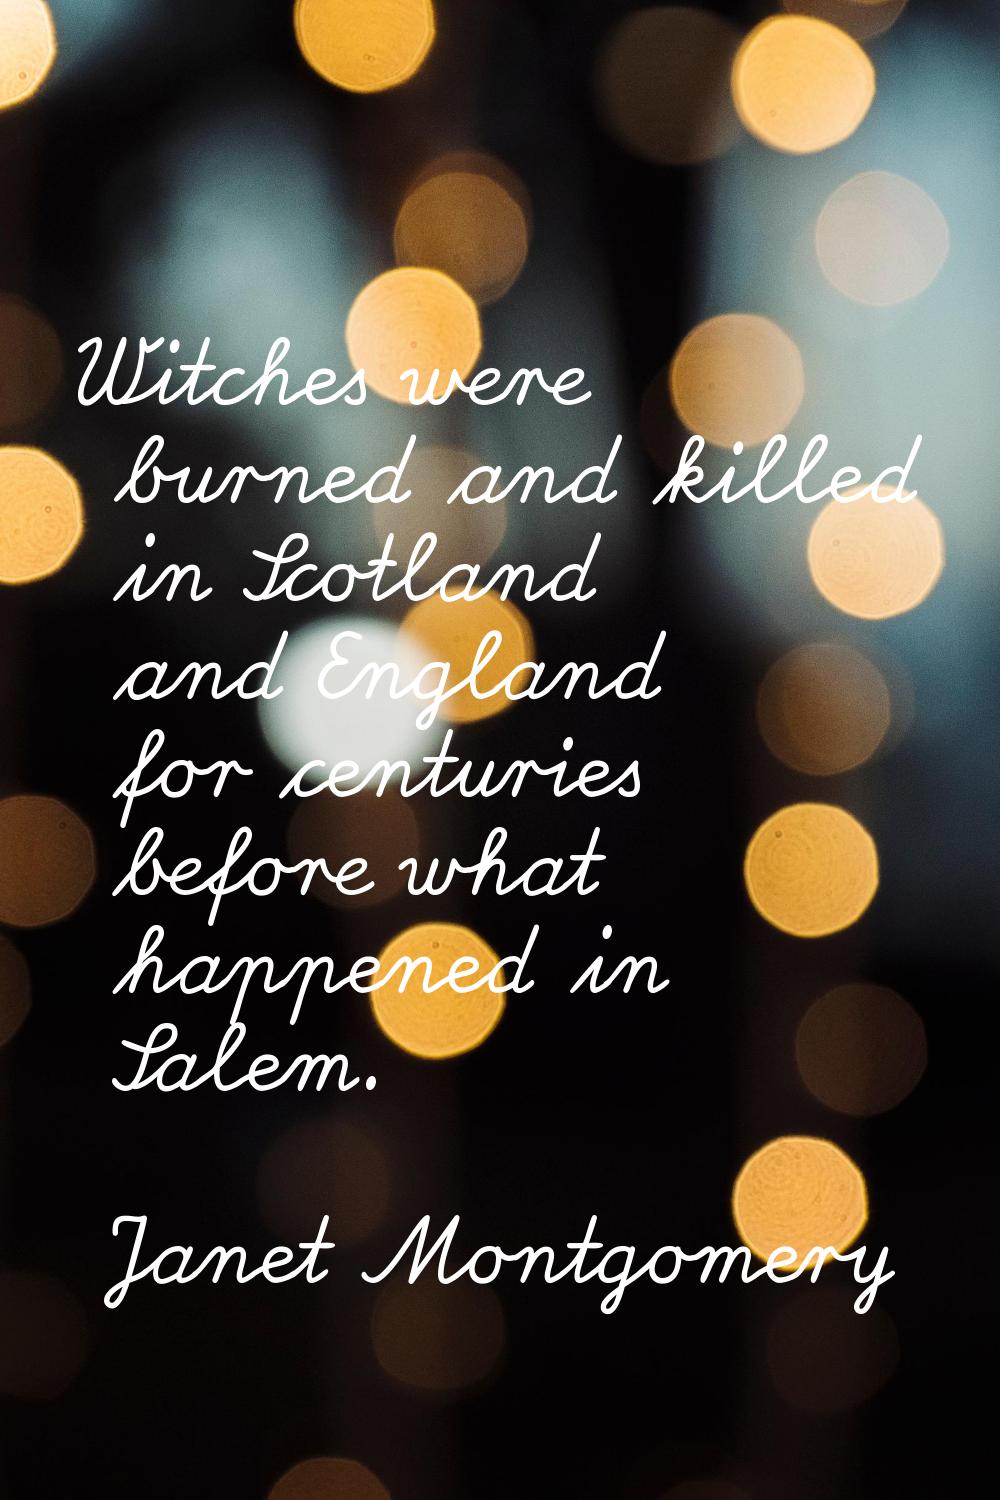 Witches were burned and killed in Scotland and England for centuries before what happened in Salem.